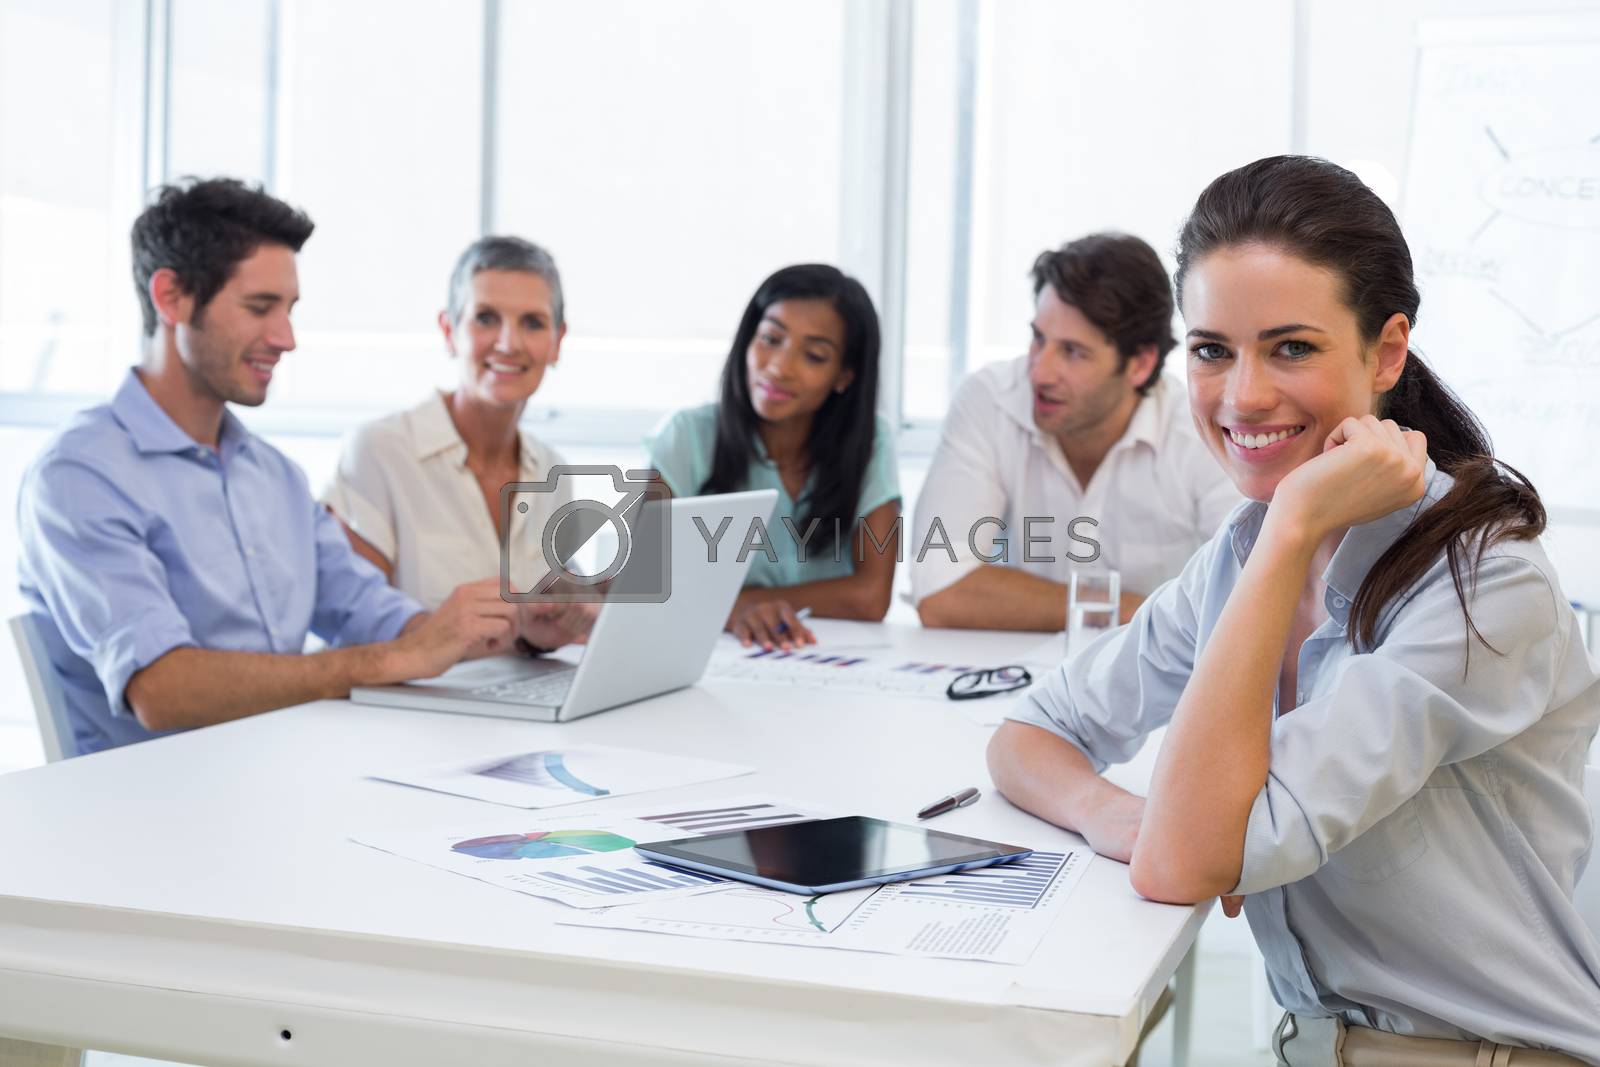 Royalty free image of Attractive businesswoman smiling in the workplace by Wavebreakmedia